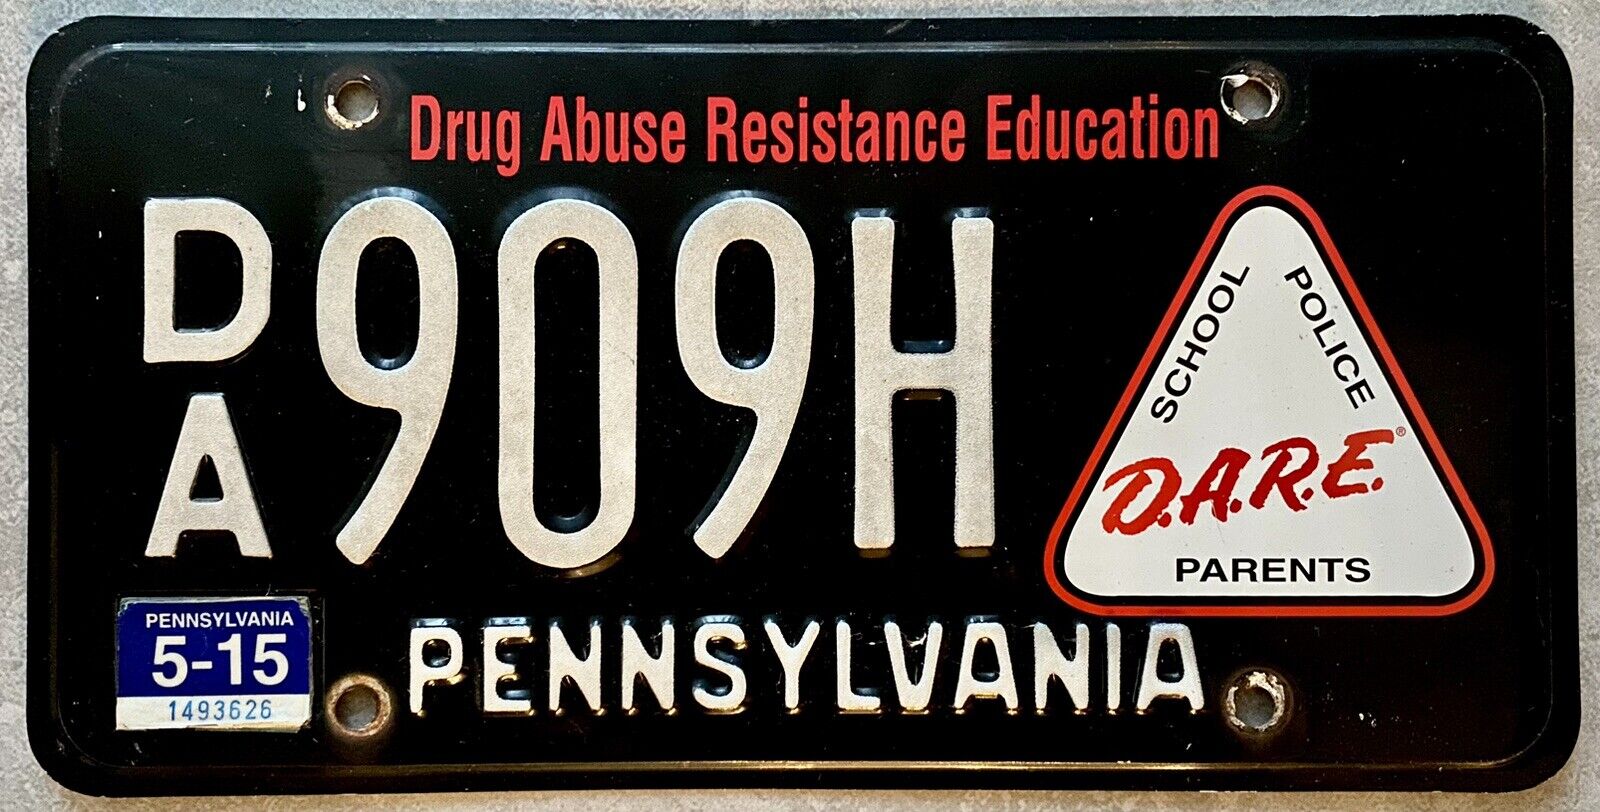 2015 Pennsylvania DARE Drug Abuse Resistance Education License Plate EXPIRED